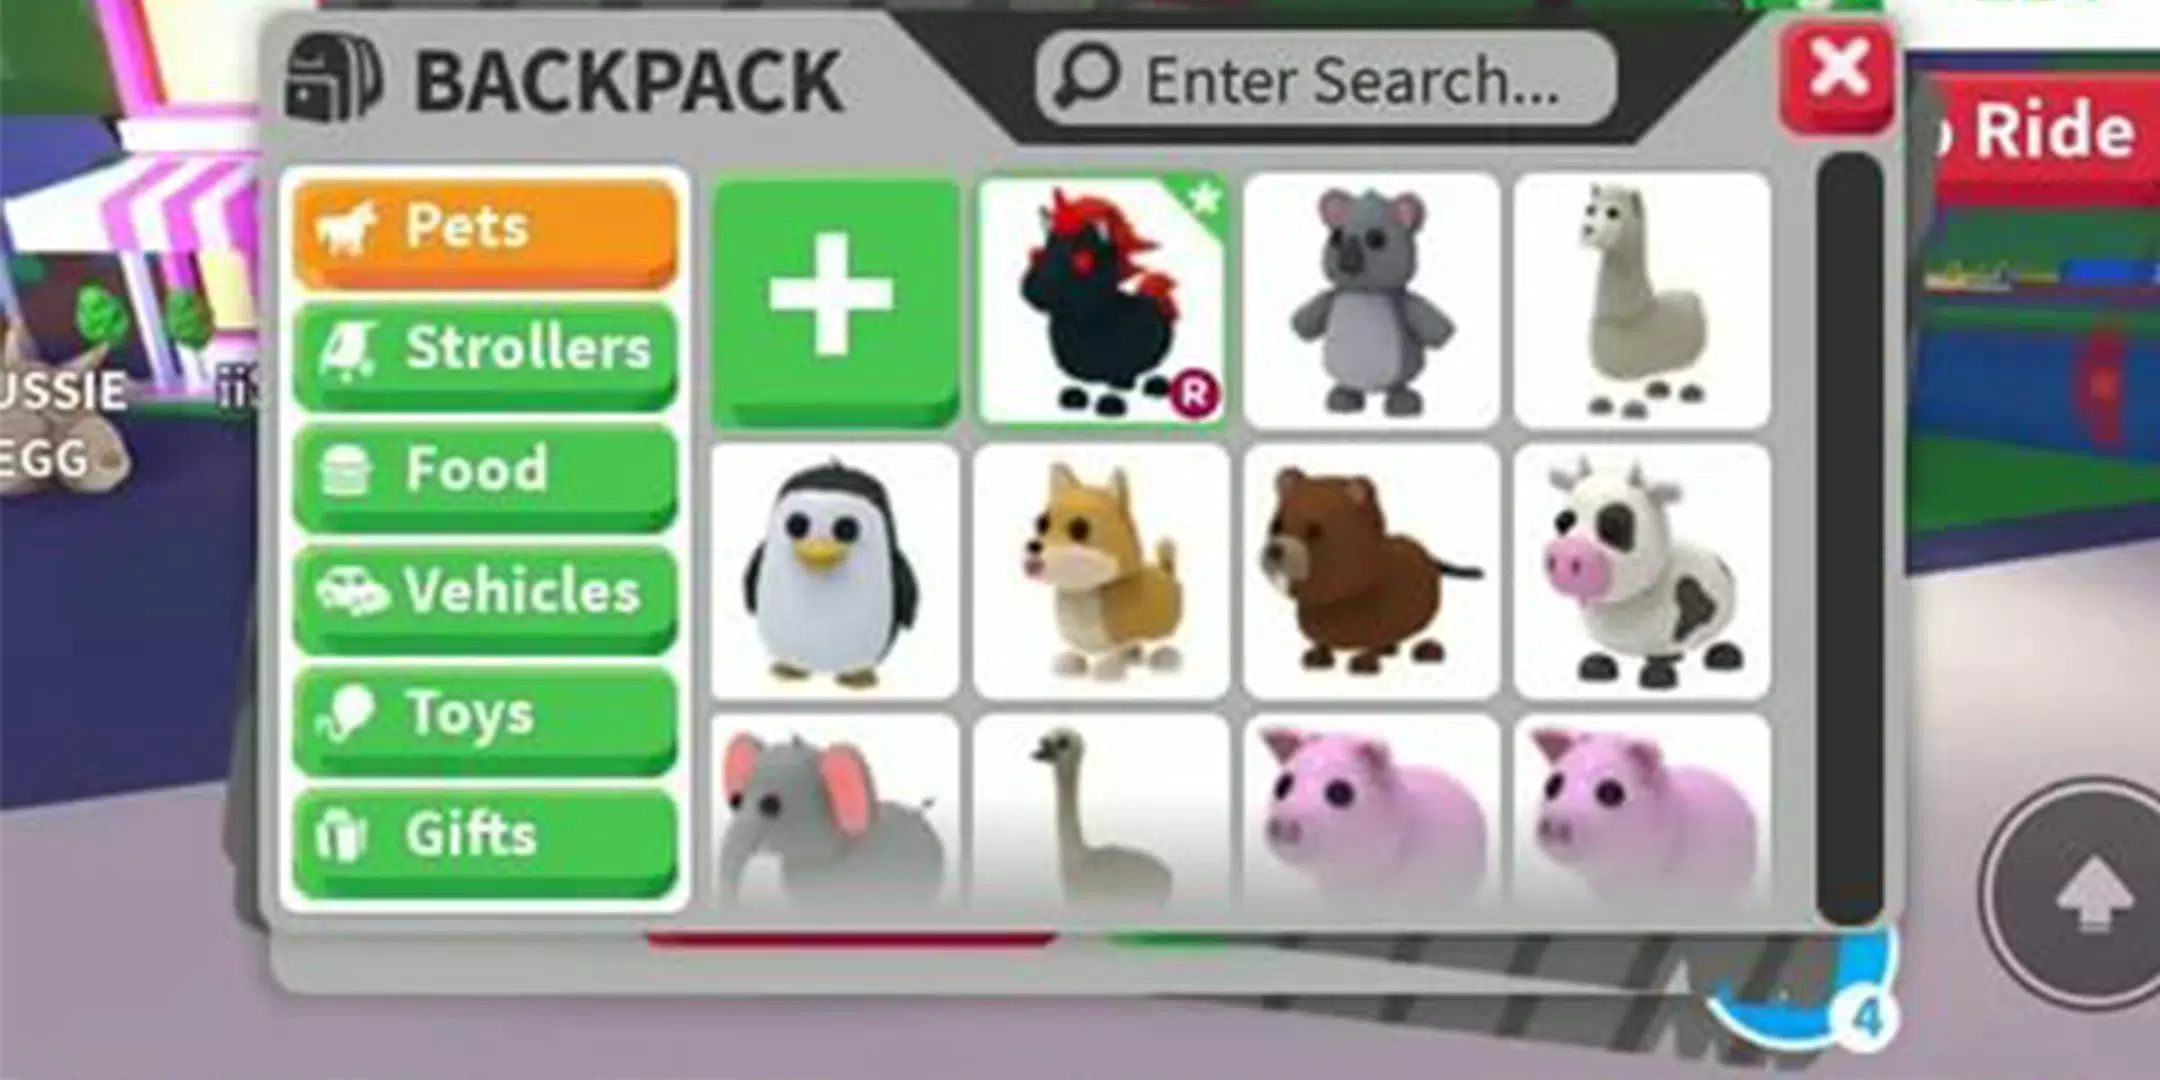 Walkthrough & Tricks For Adopt me pets guide APK for Android Download